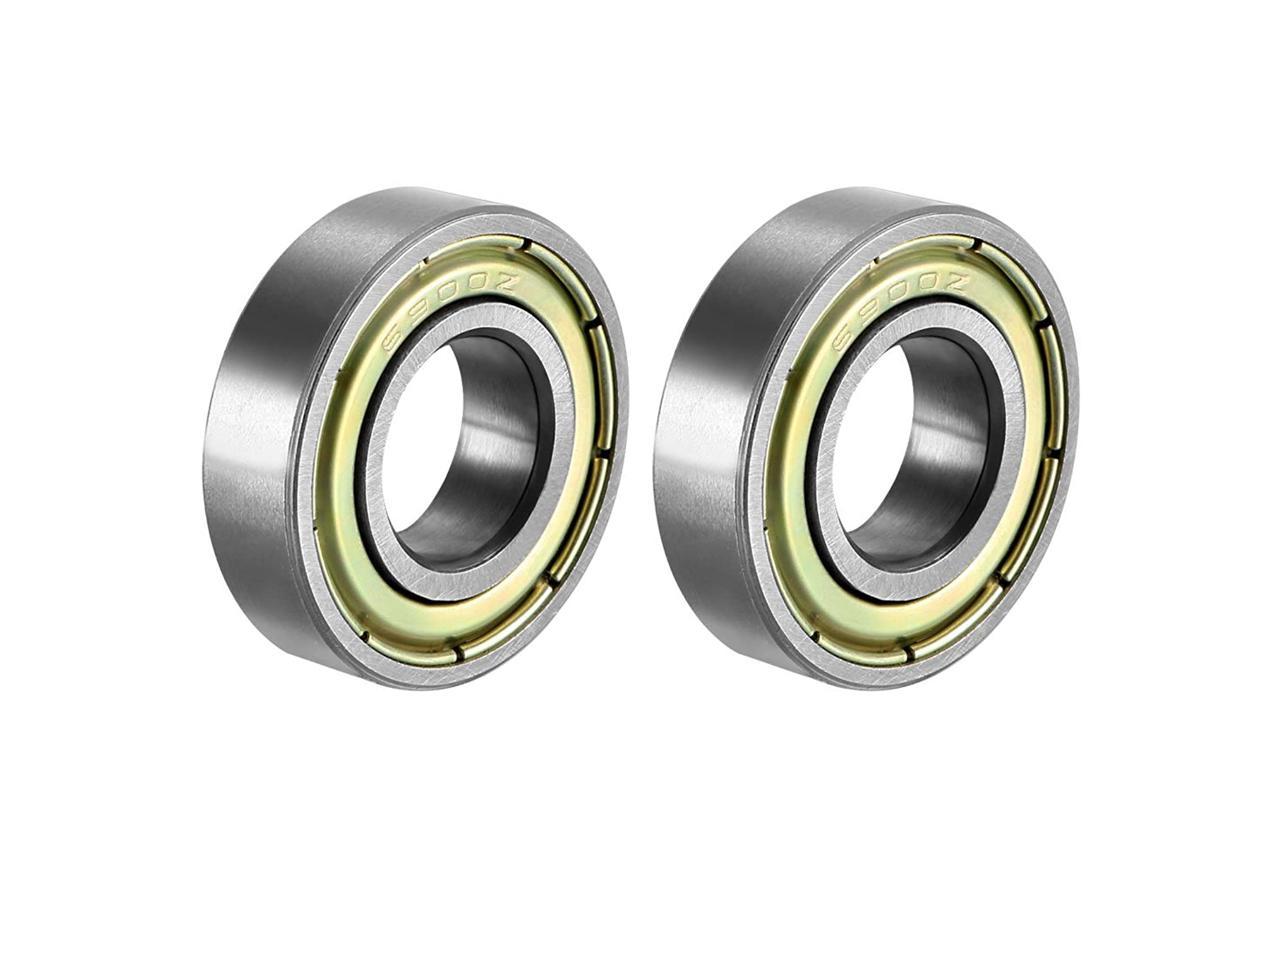 uxcell Deep Groove Ball Bearing Double Sealed 10mm x 22mm x 6mm Carbon Steel Bea 